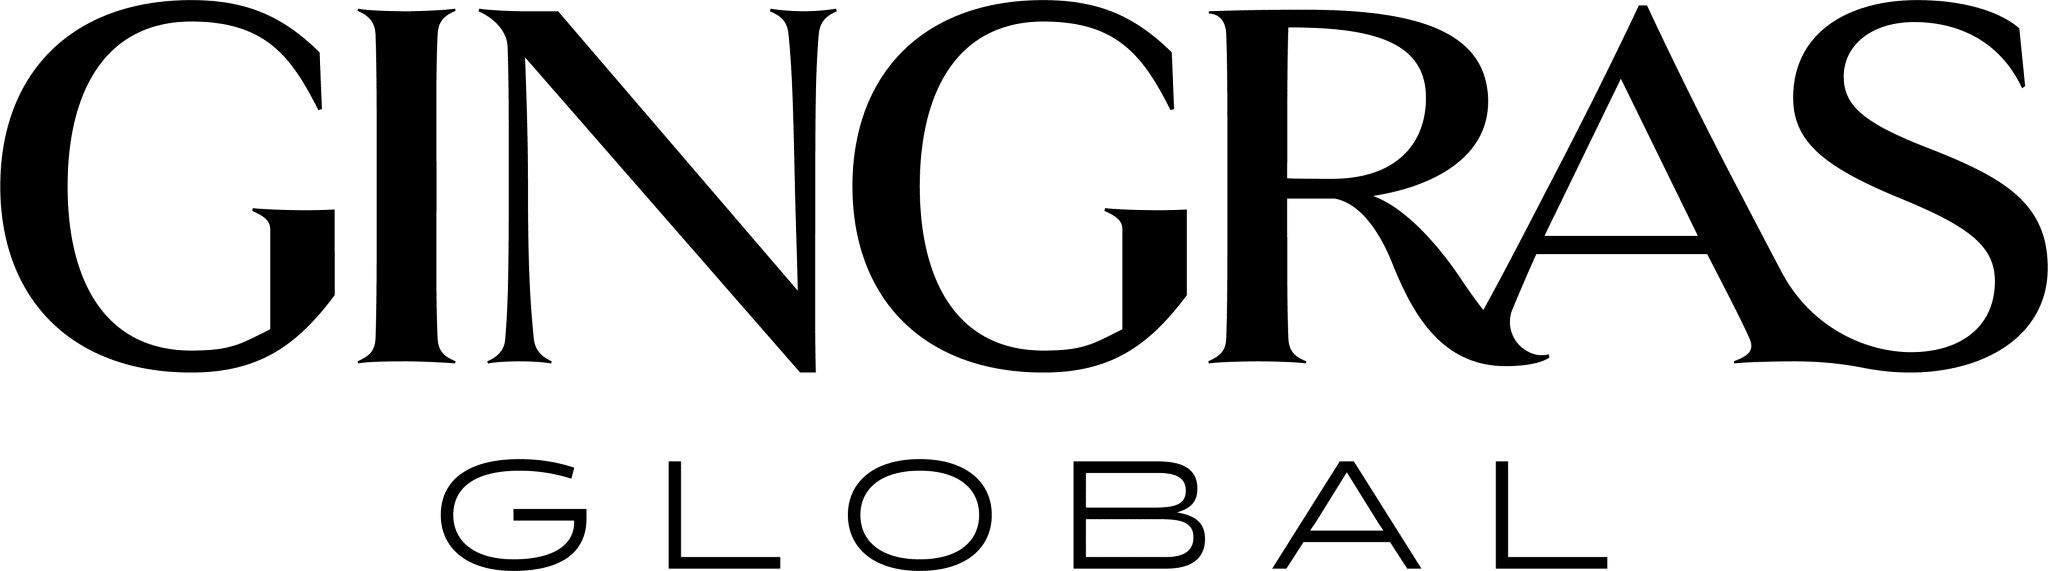 events Archive - Christian Business Round Table | Gingras Global : 